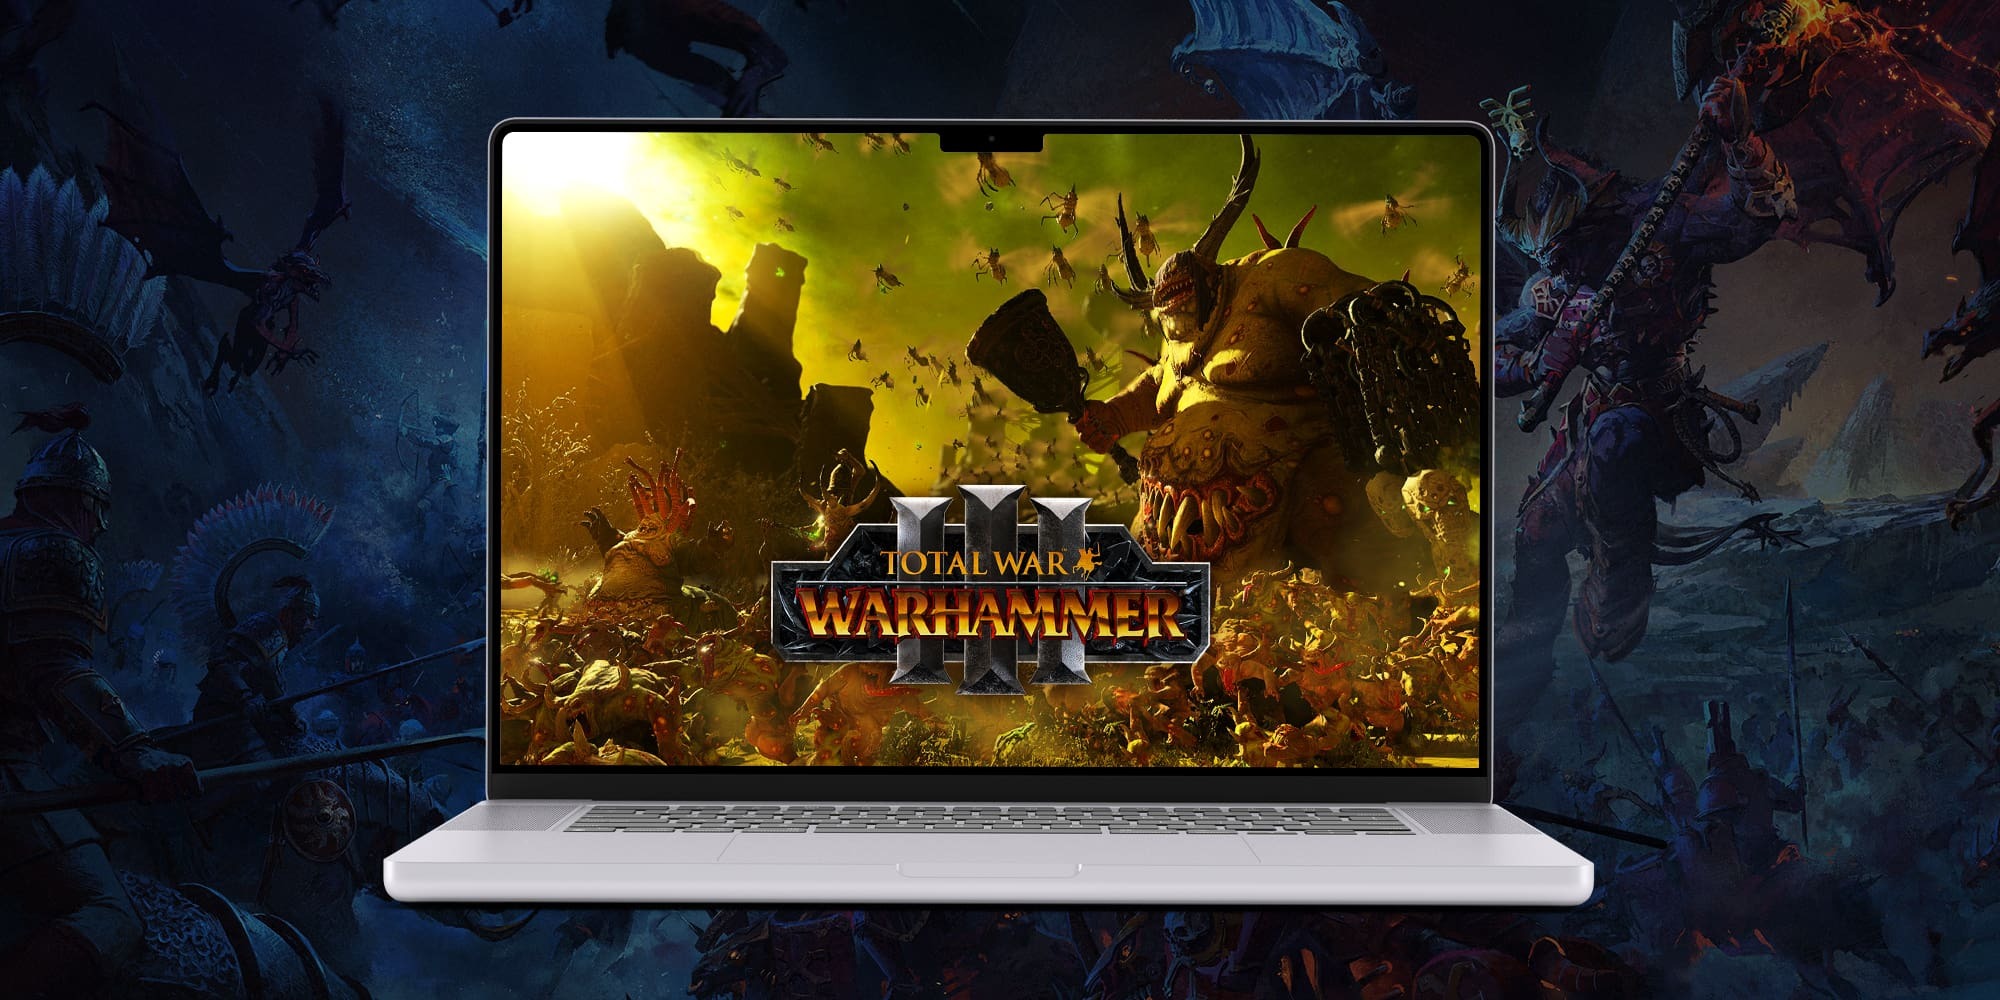 Total War: WARHAMMER is out now on Silicon Macs - 9to5Mac